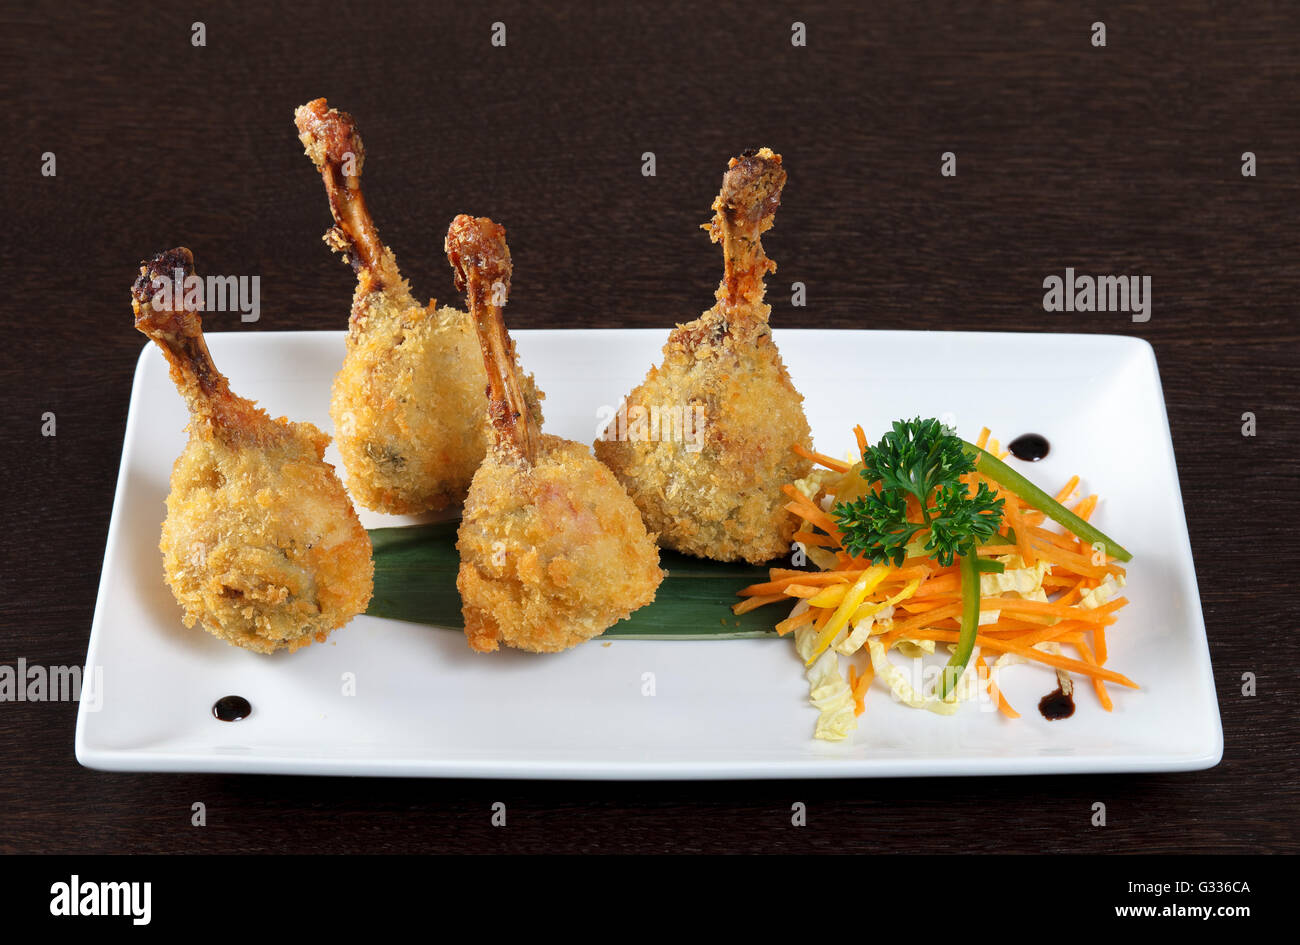 Kara-age. Fried chicken legs breaded and vegetarian side dish with ...